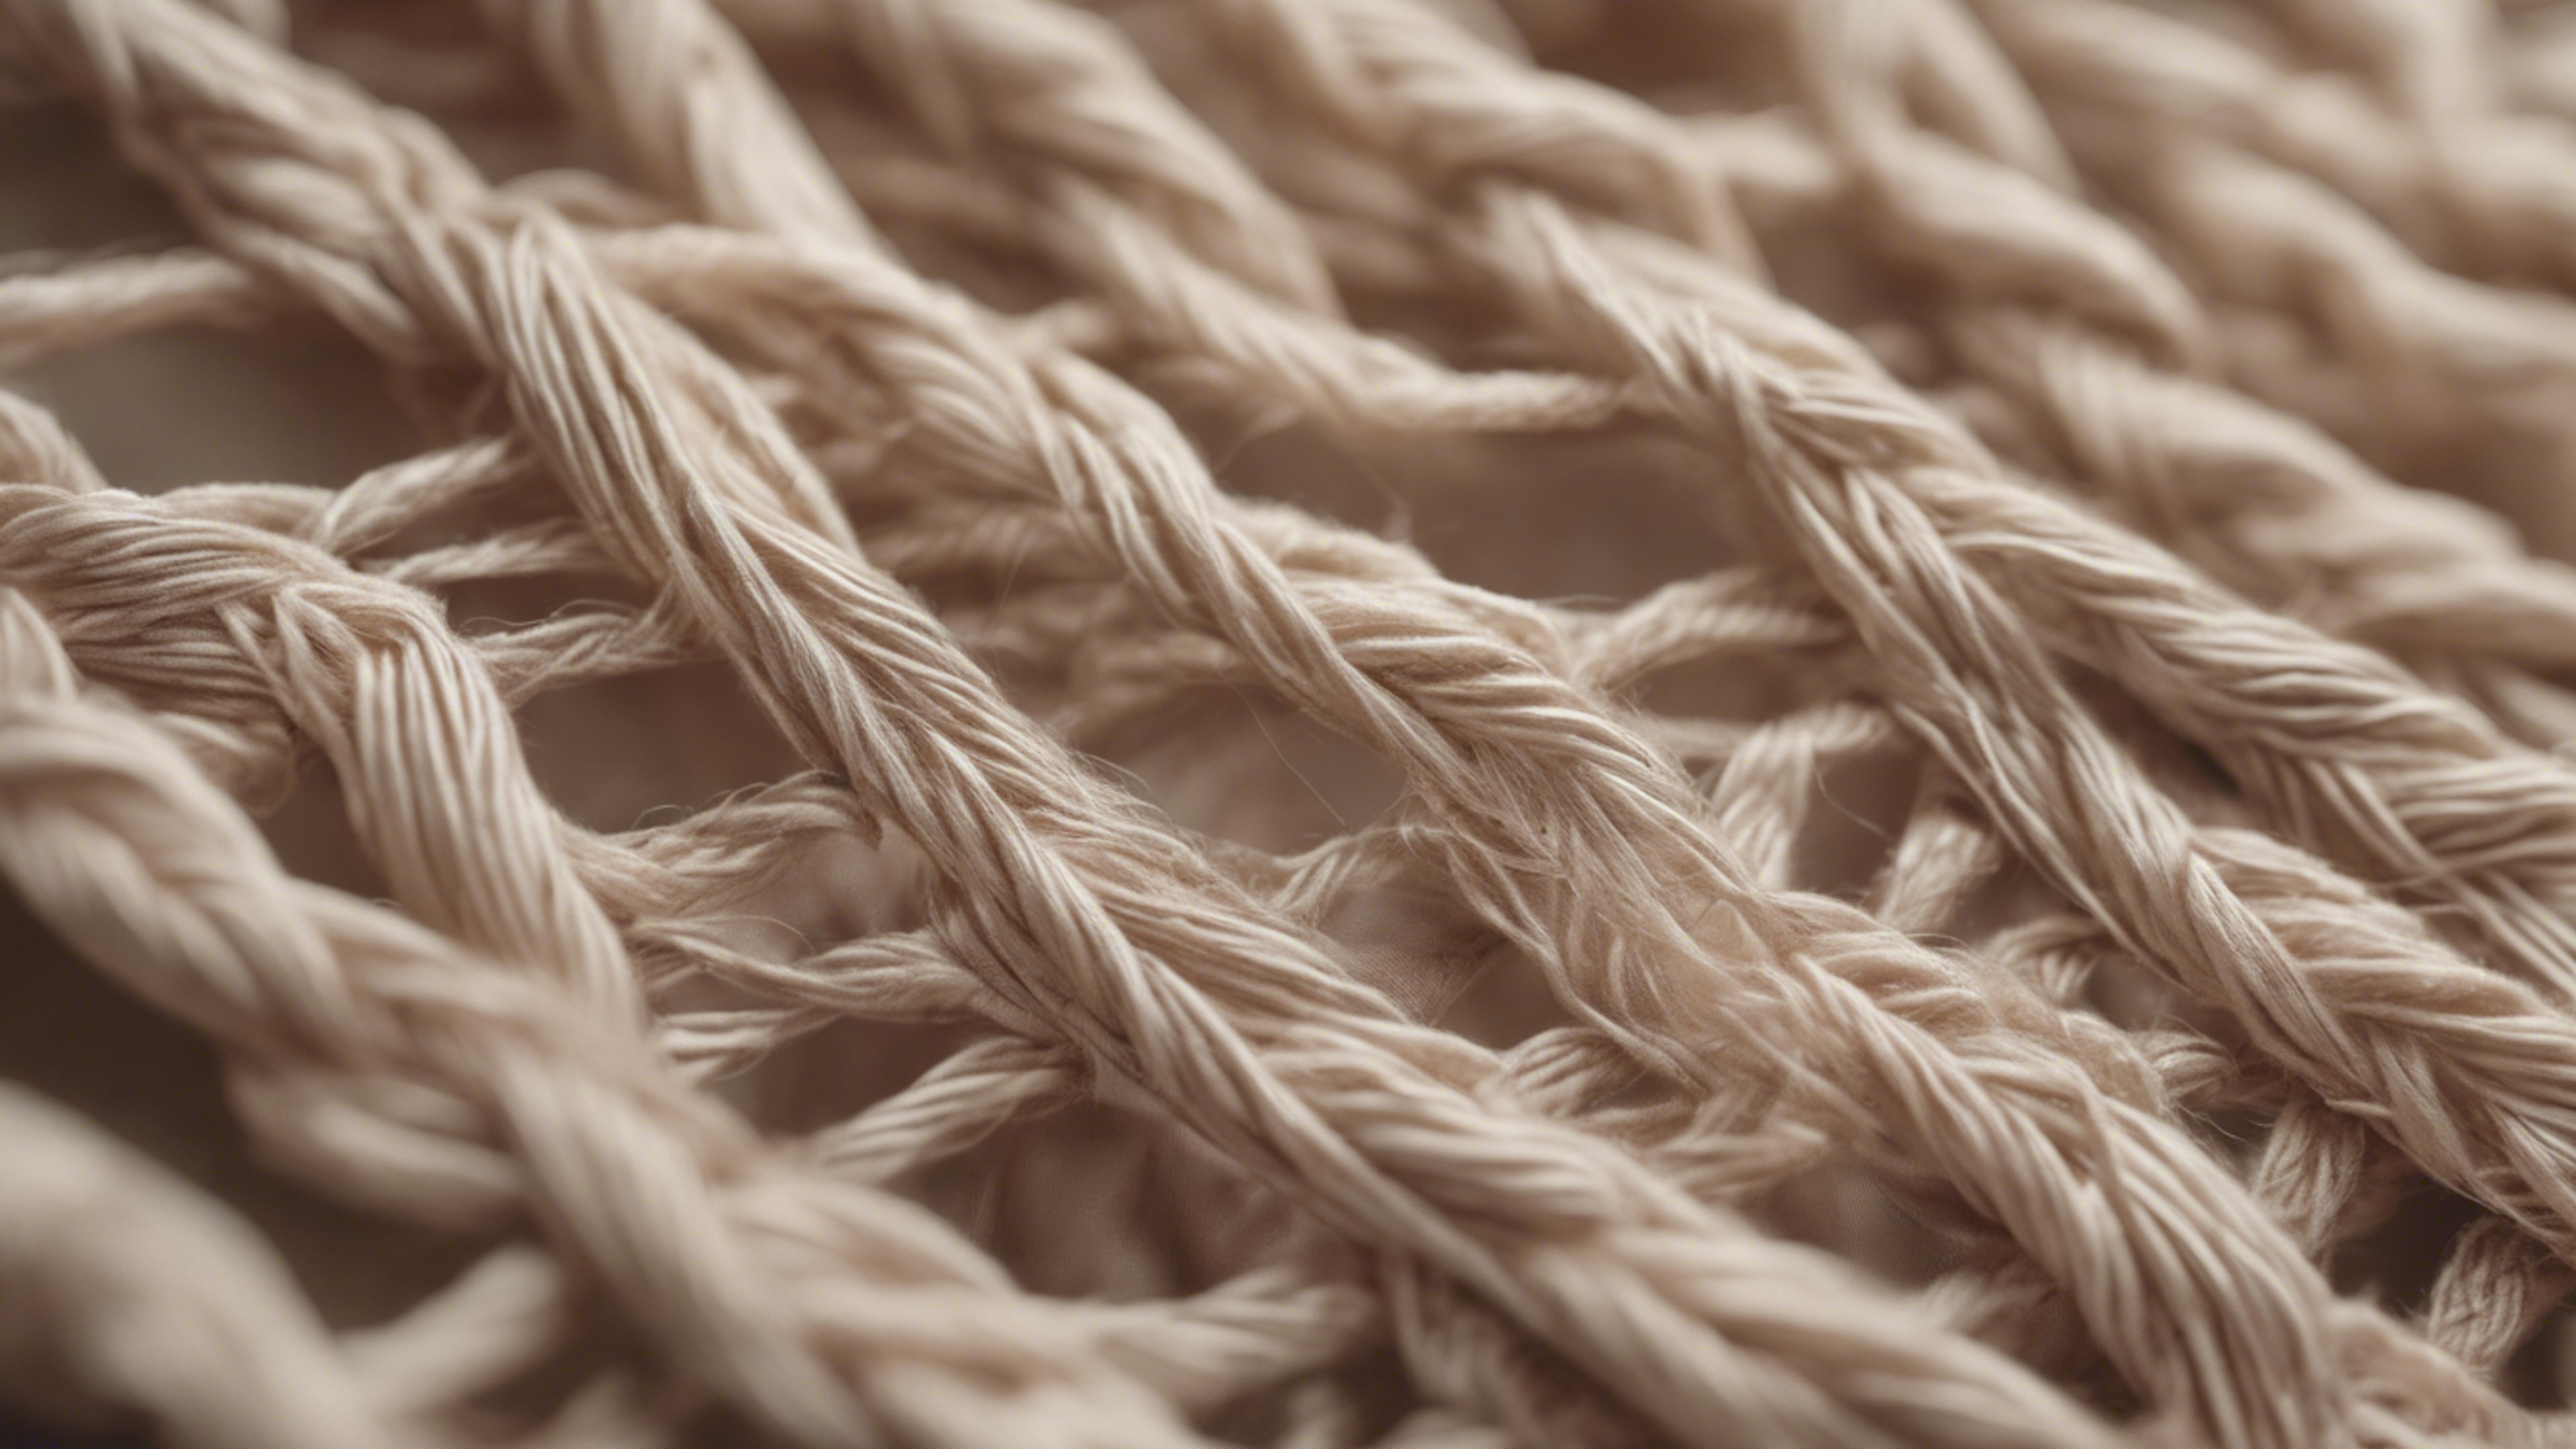 A close-up of cool beige threads interweaving to form a unique, patterned fabric. Taustakuva[e47f0bd142b54d48a5a0]